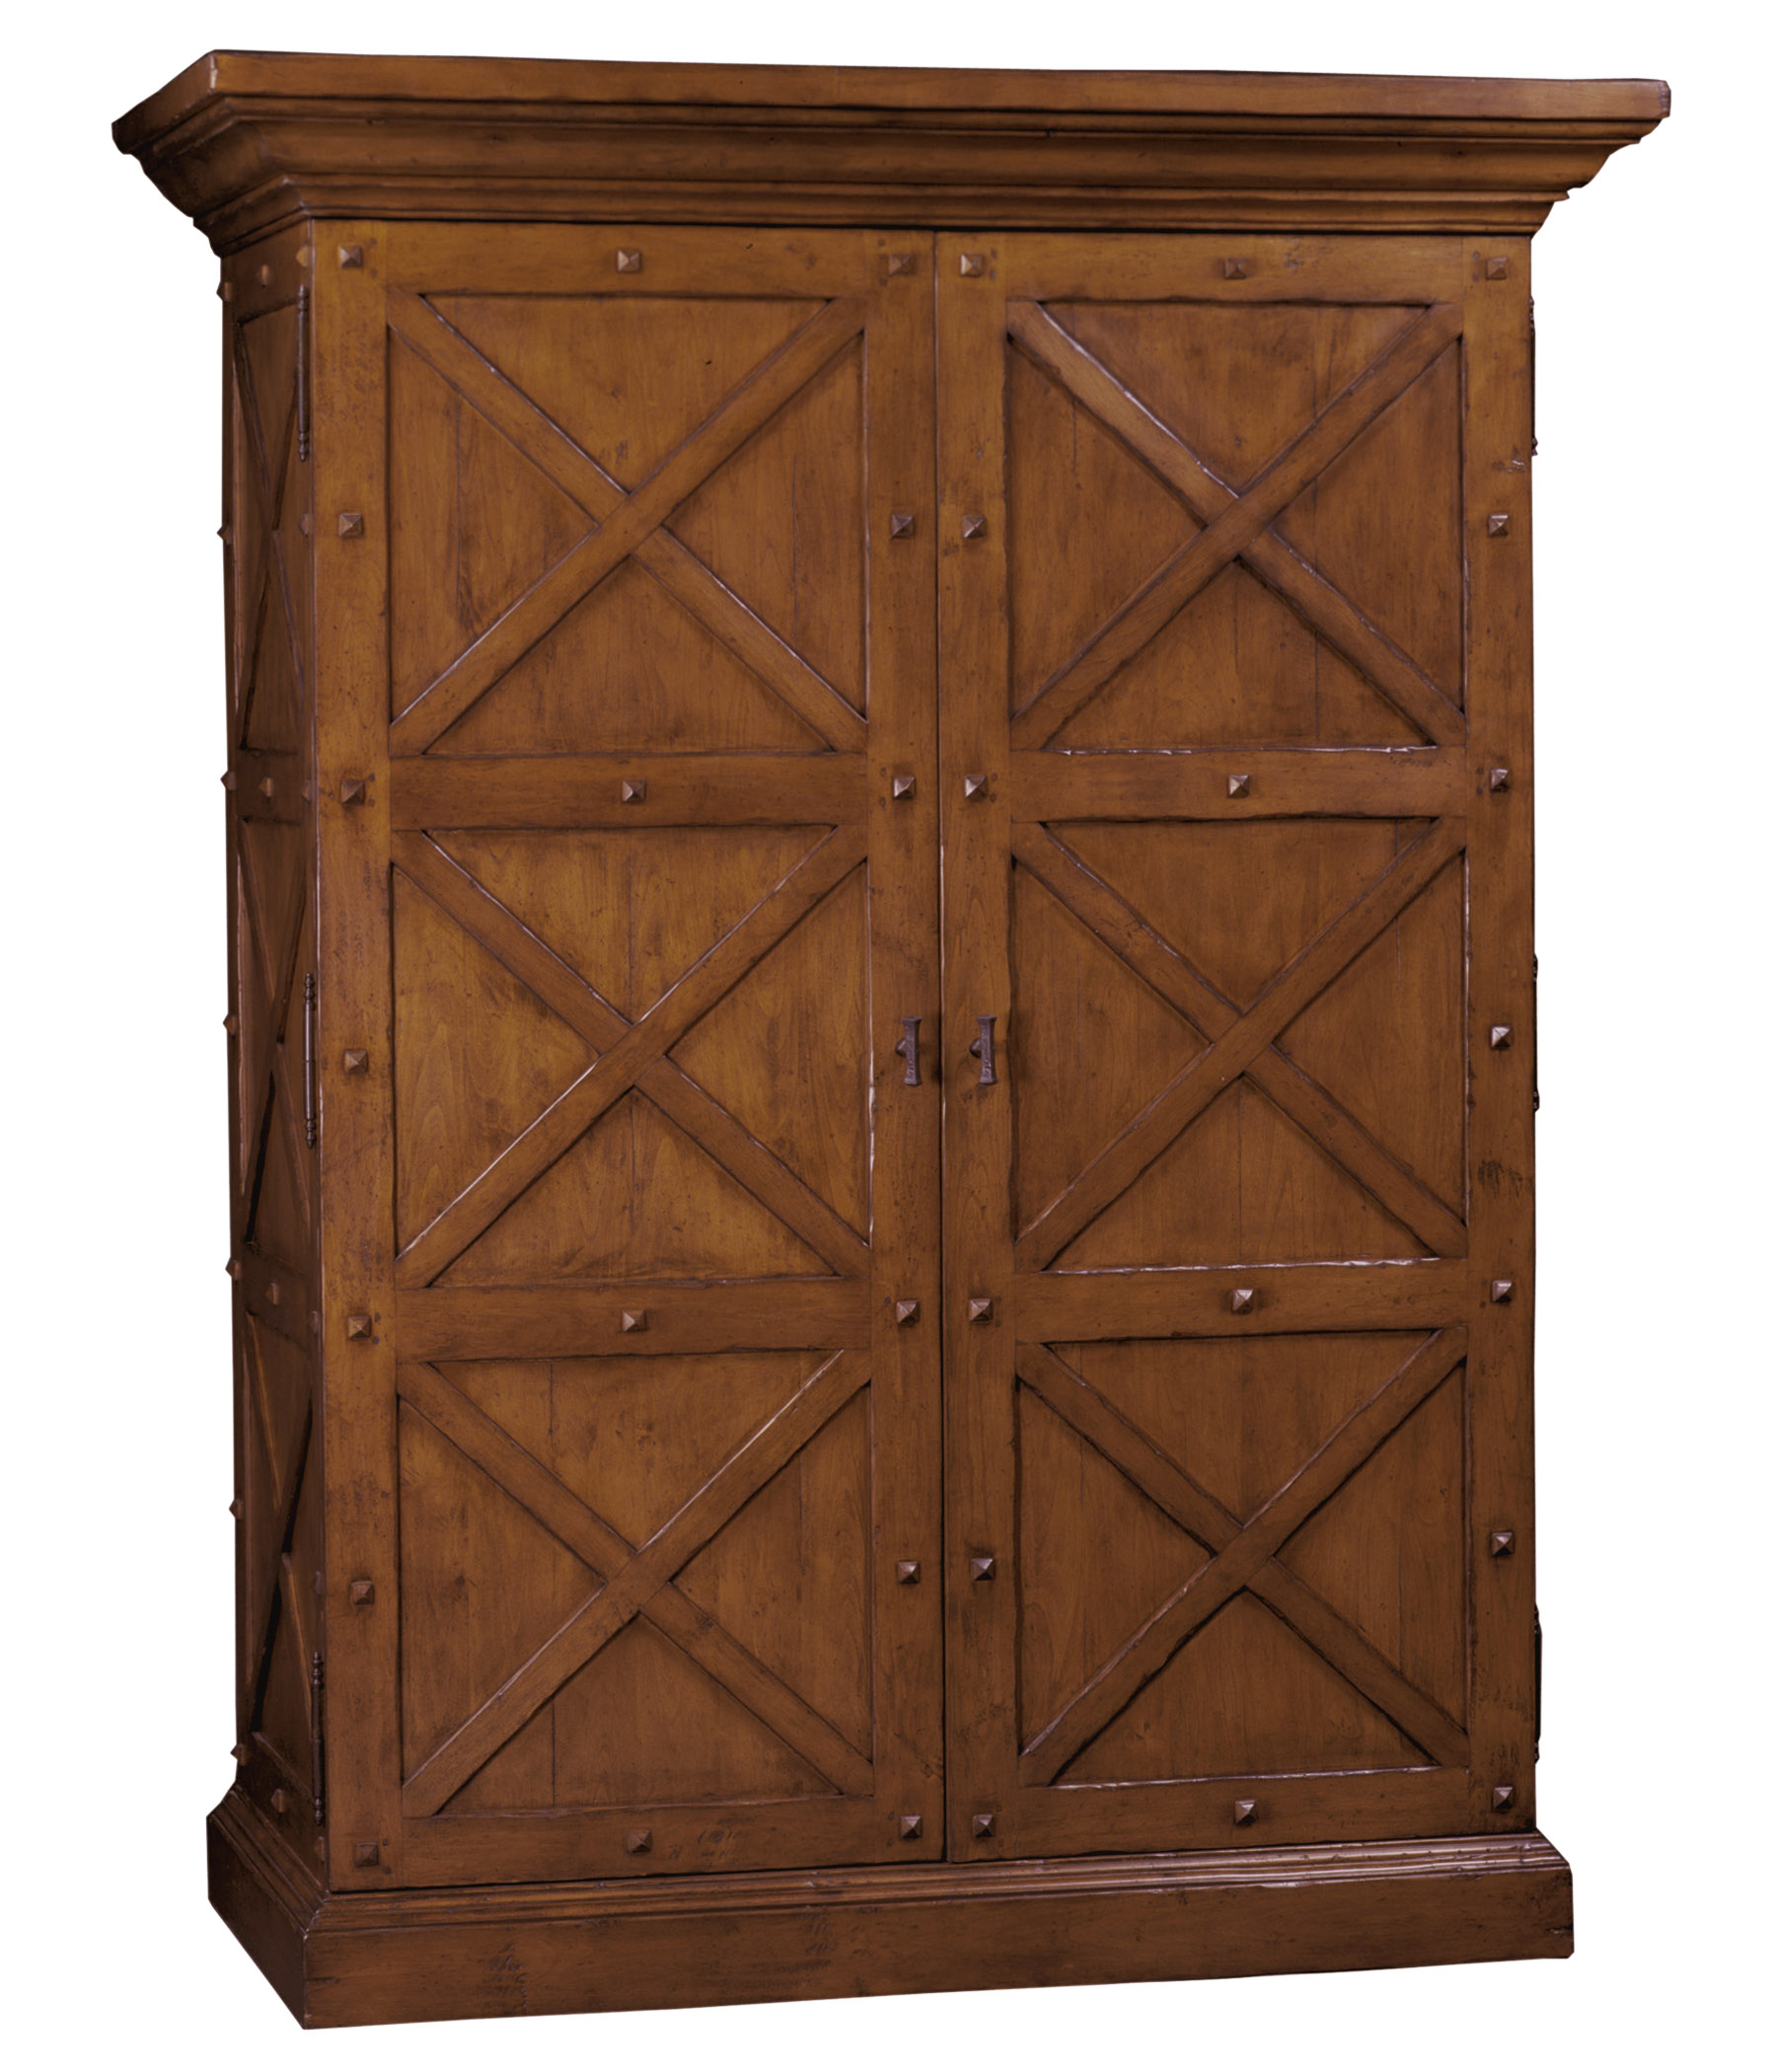 Dominican transitional armoire cabinet with x detail in two doors by Woodland furniture in Idaho Falls